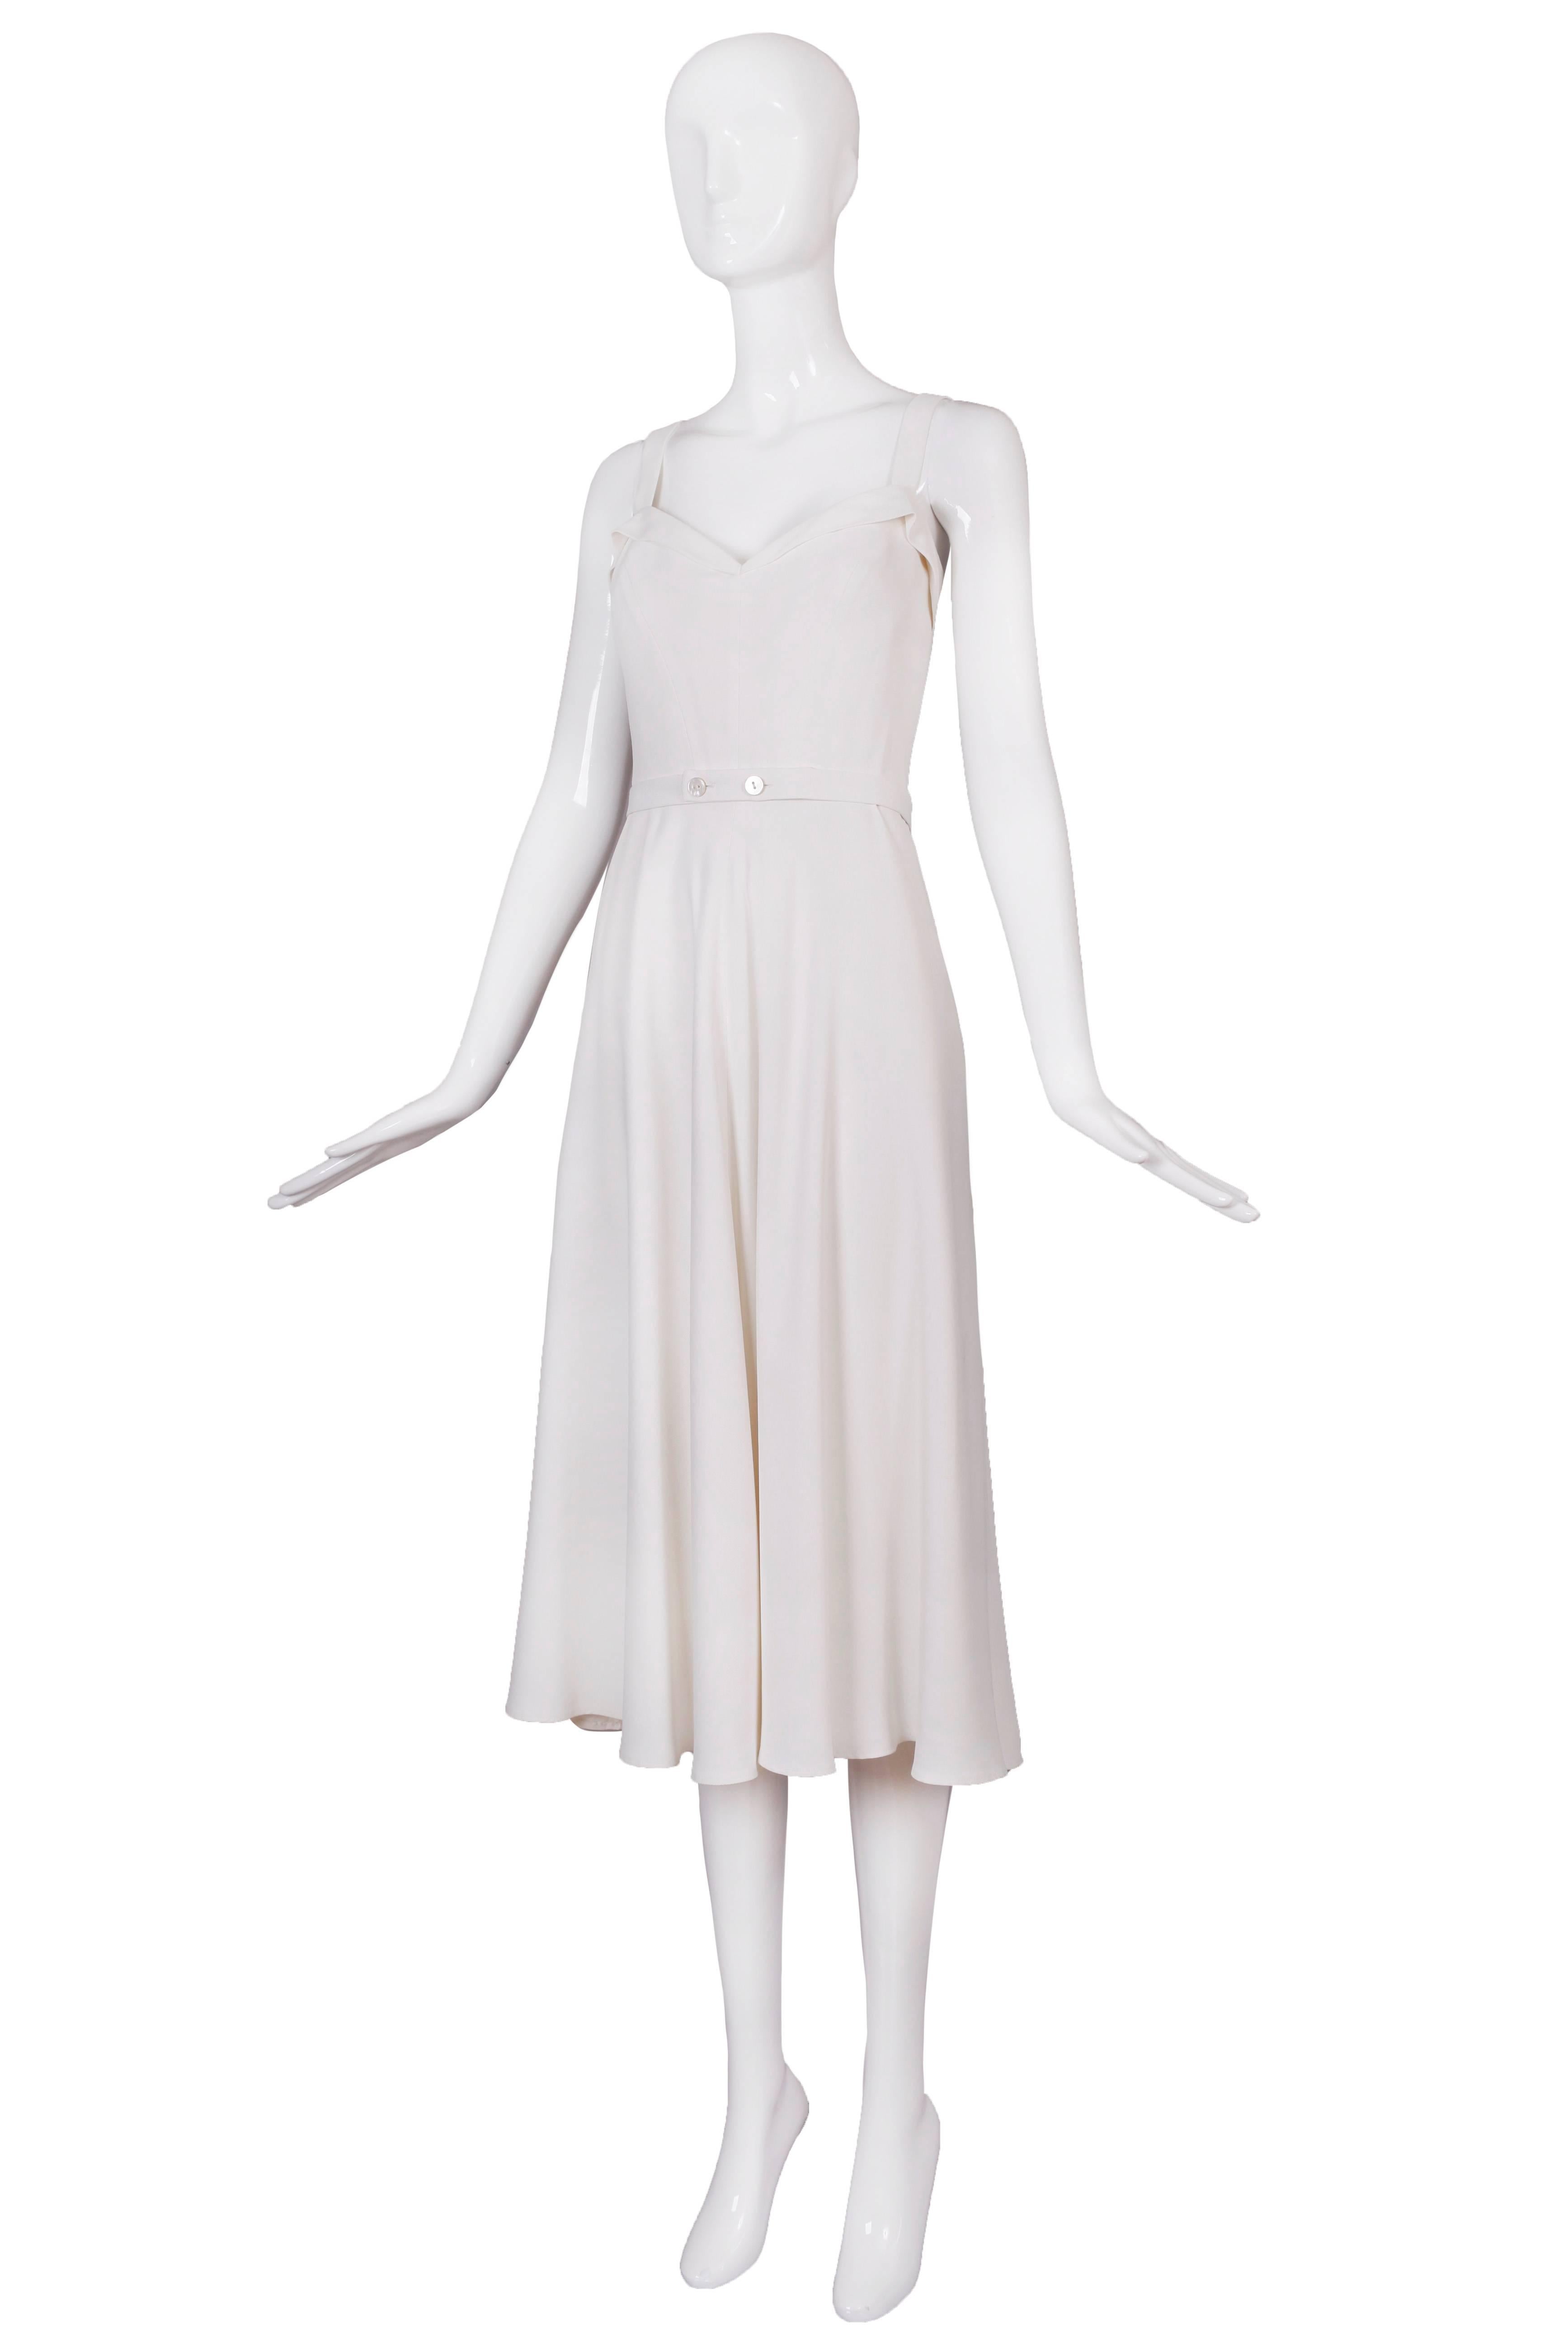 Ralph Lauren purple label white 100% rayon white summer dress with belt at the waist. Size 4. In excellent condition.
MEASUREMENTS:
Bust - 34